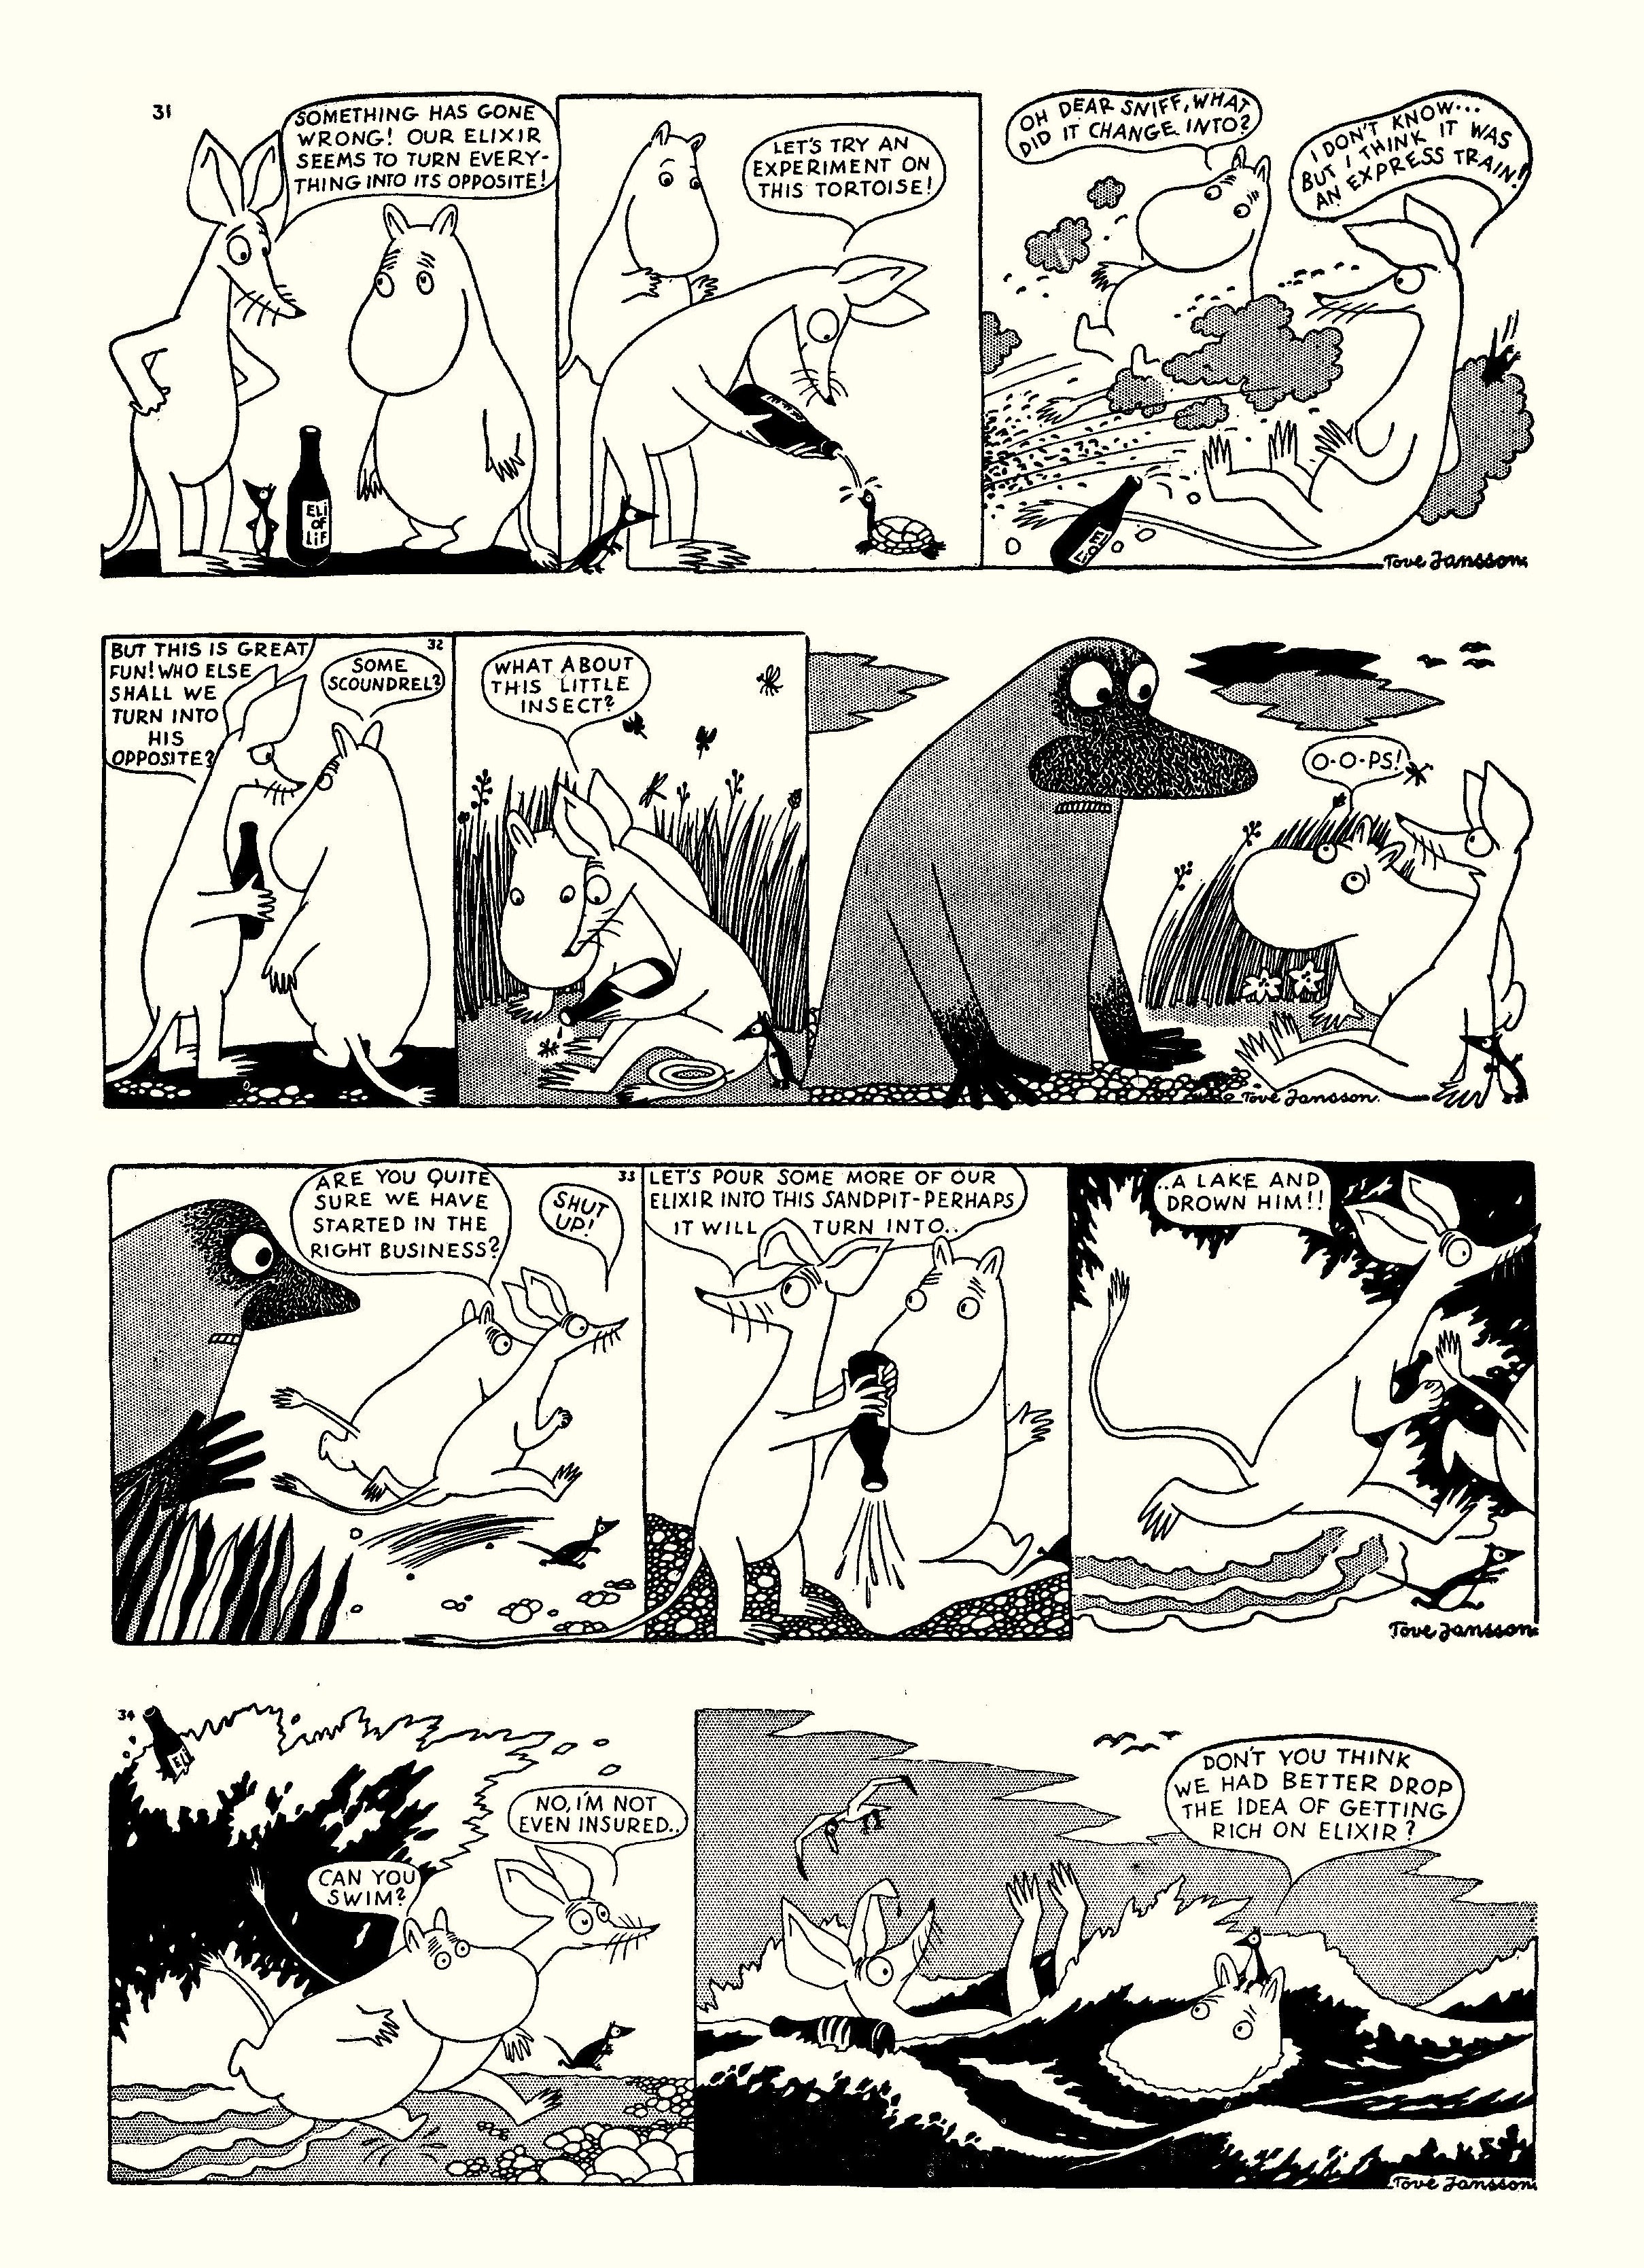 Read online Moomin: The Complete Tove Jansson Comic Strip comic -  Issue # TPB 1 - 14